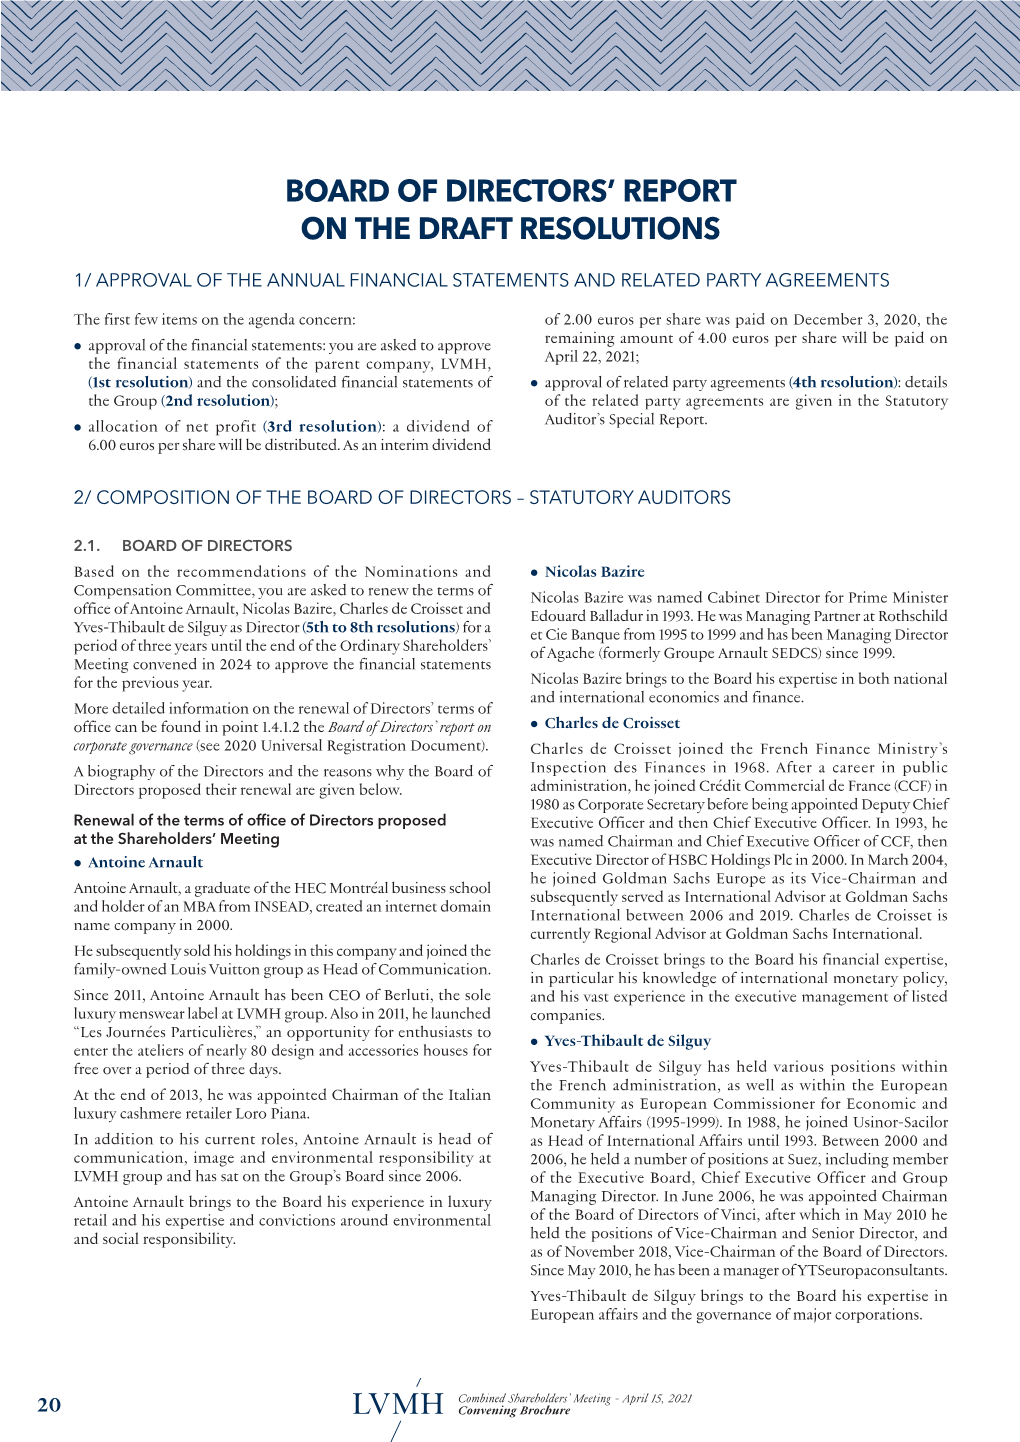 Board of Directors' Report on the Draft Resolutions